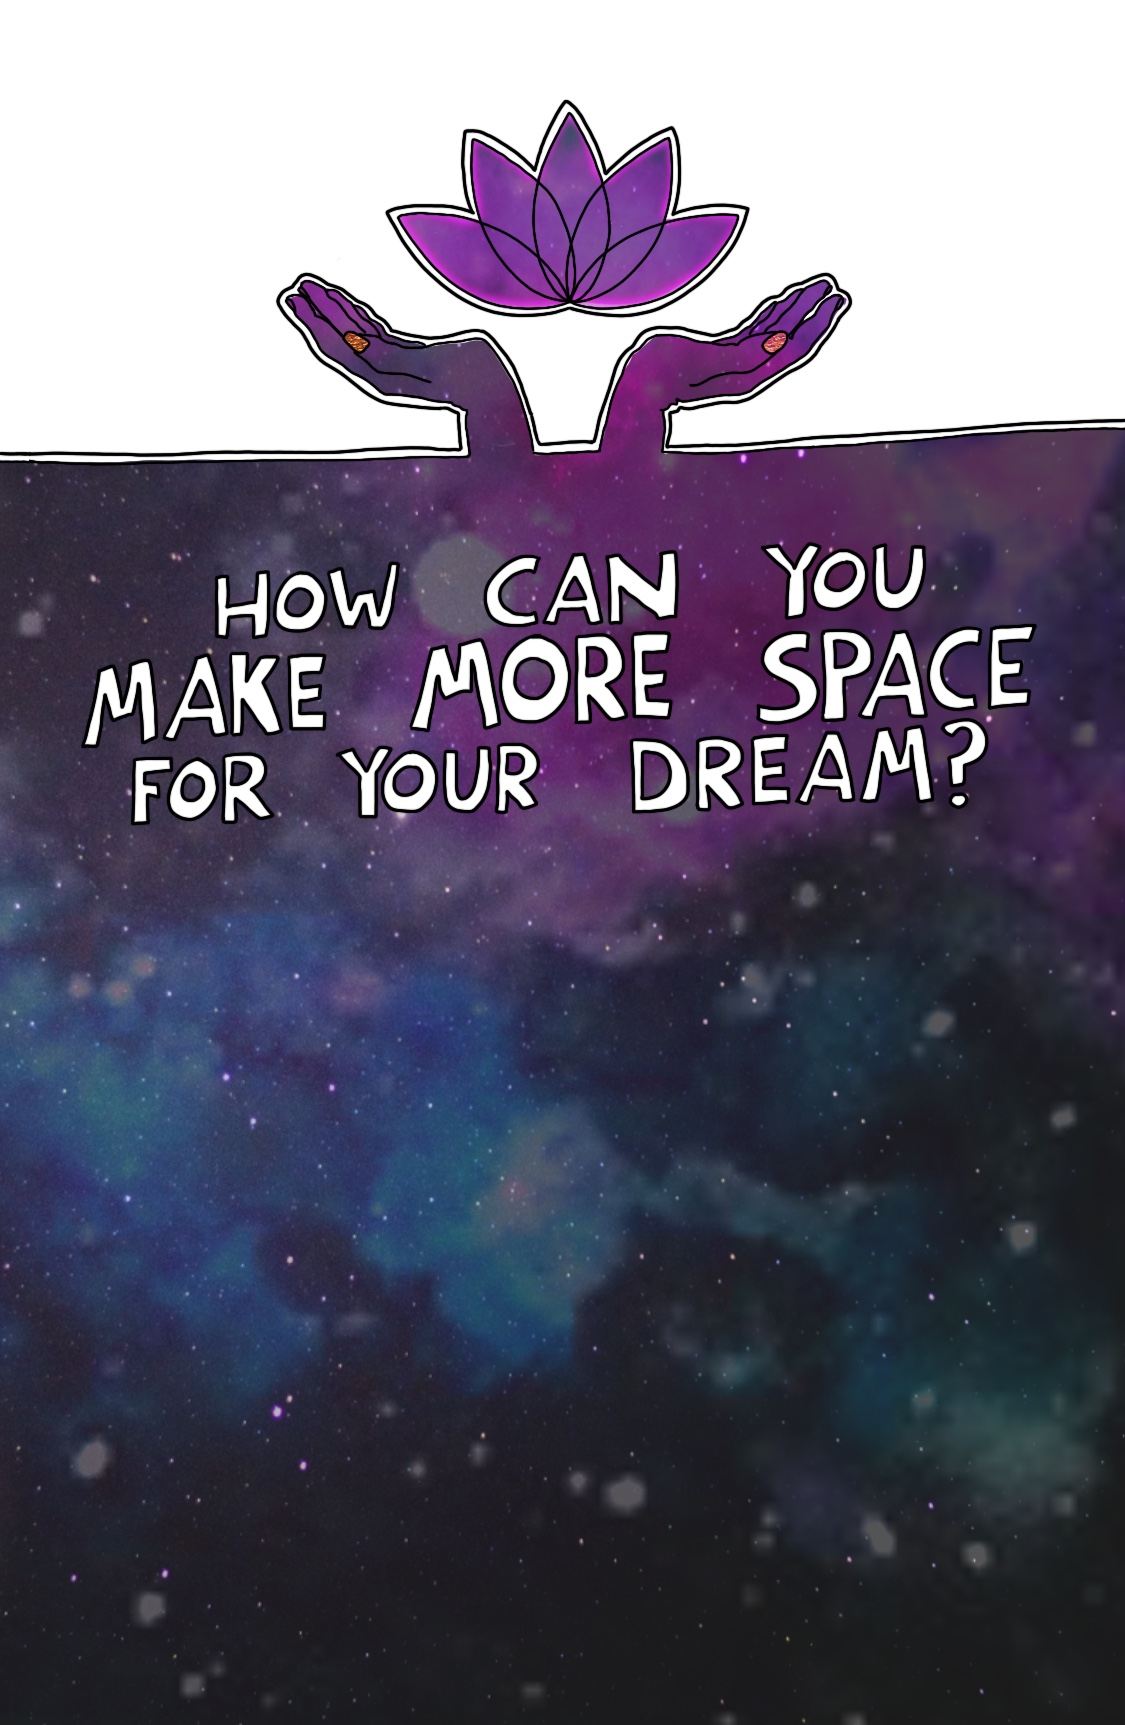 Journal Prompt: How can you make more space for your dream?